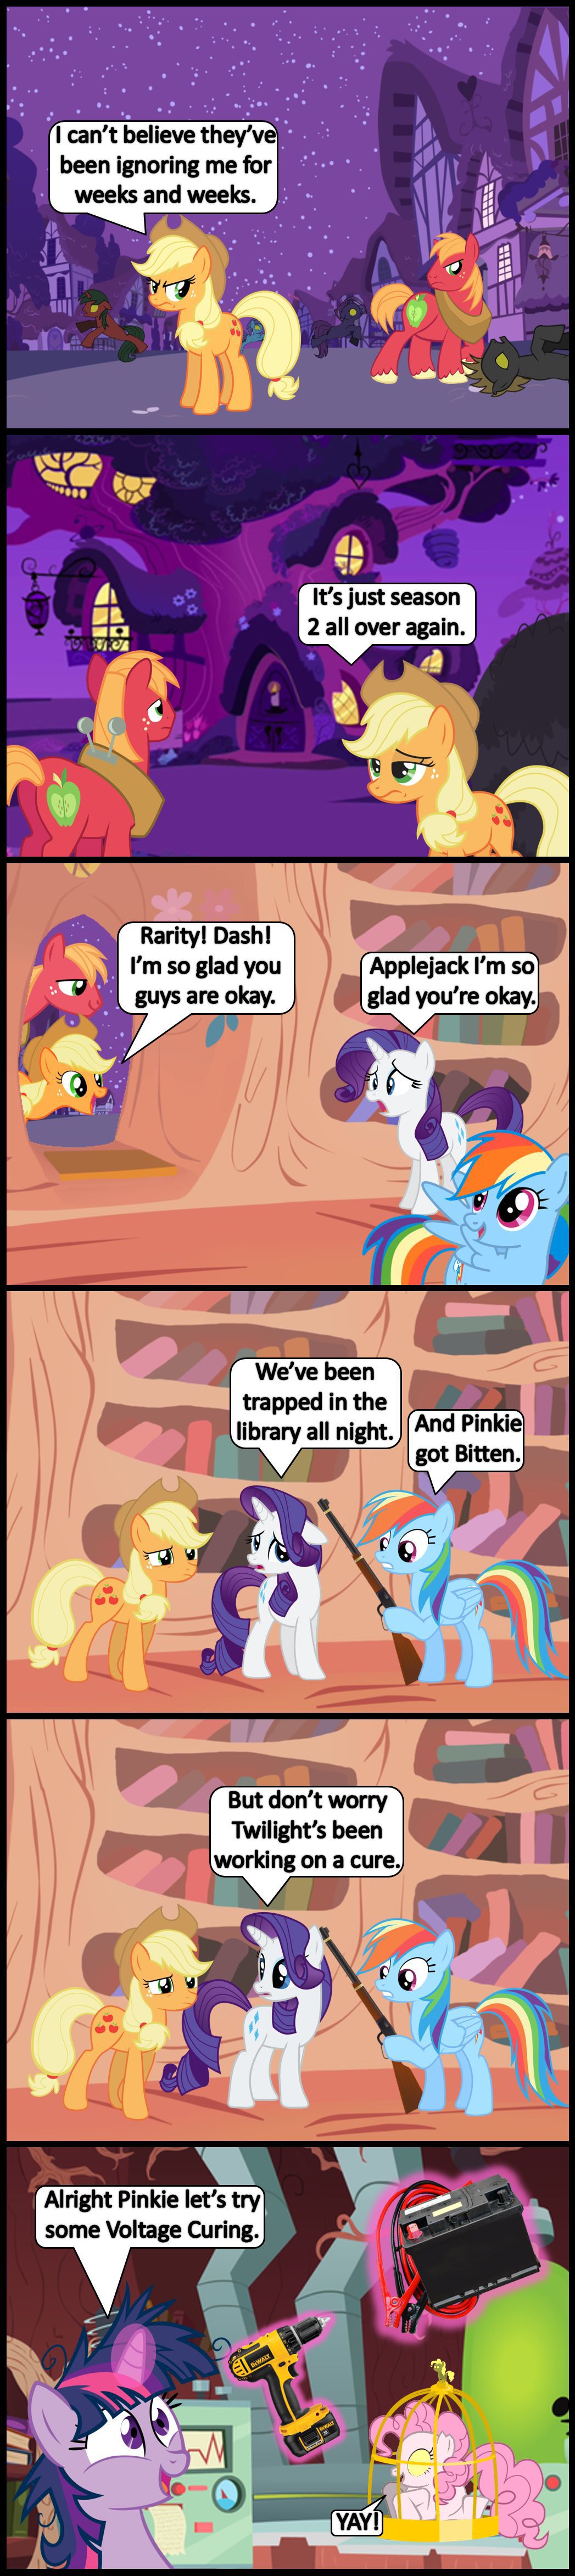 [Bronybyexception] Beating a Dead Pony (My Little Pony: Friendship is Magic) [English] [Ongoing] 22